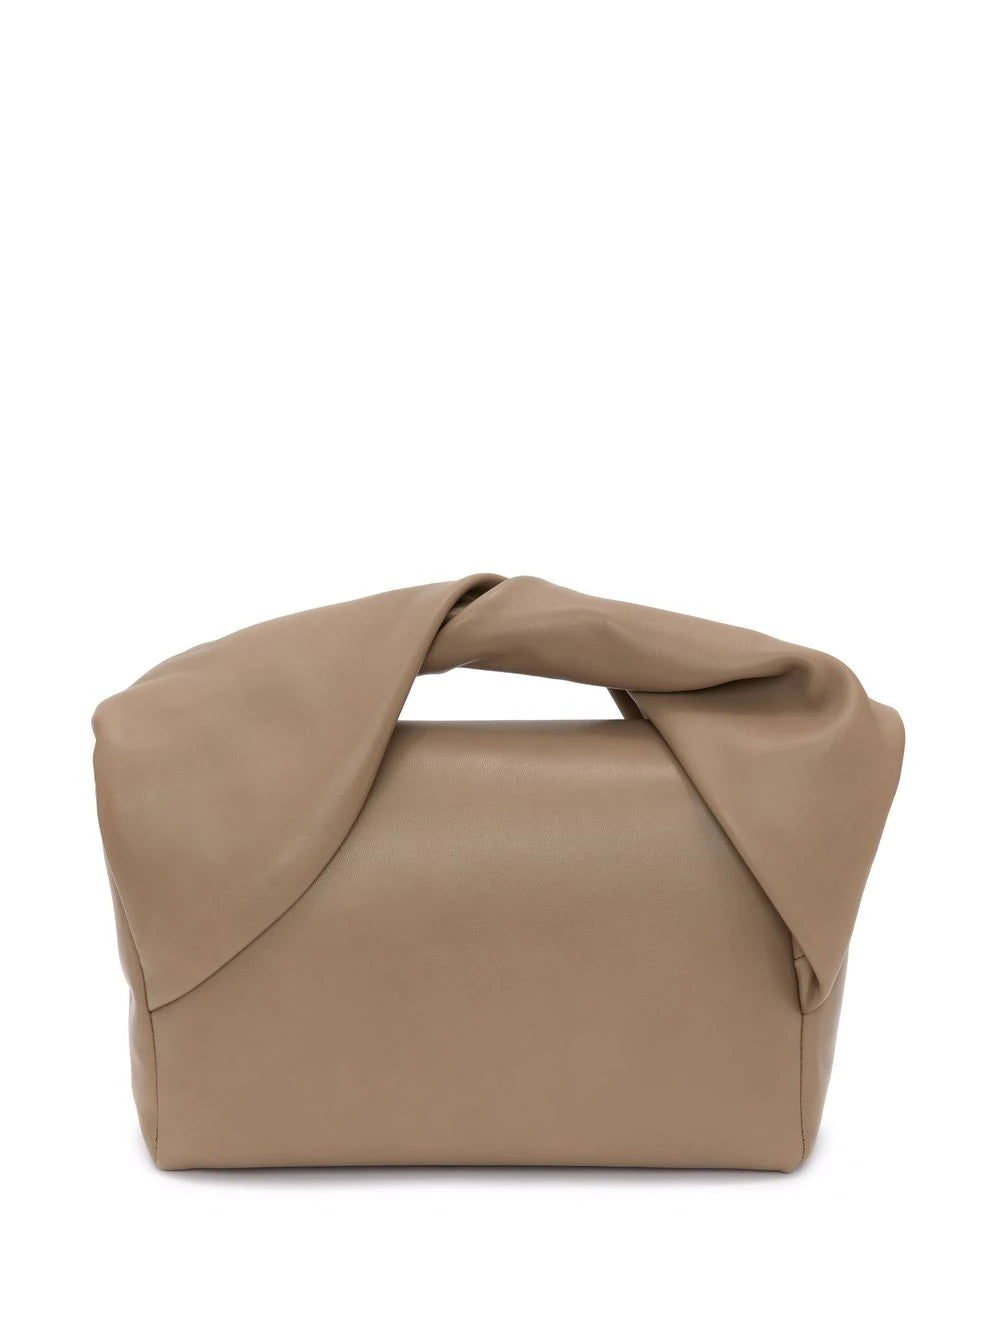 Twister Tote Bag - Taupe